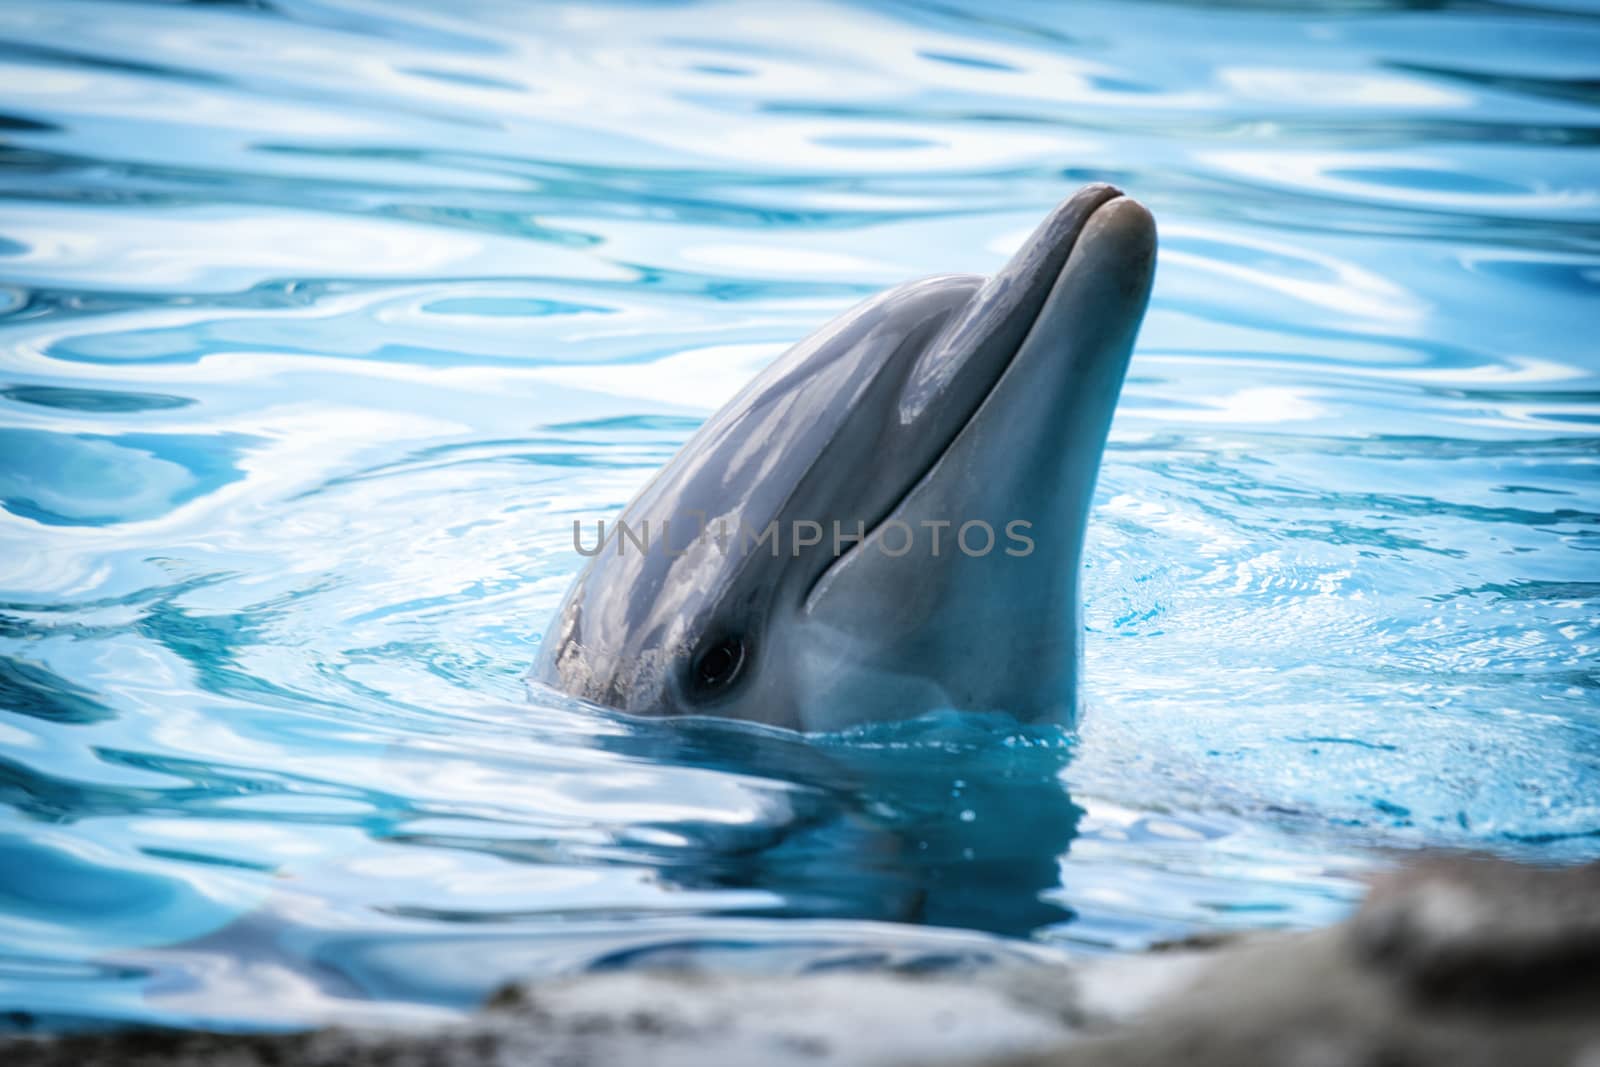 Smiling dolphin by stefanoventuri